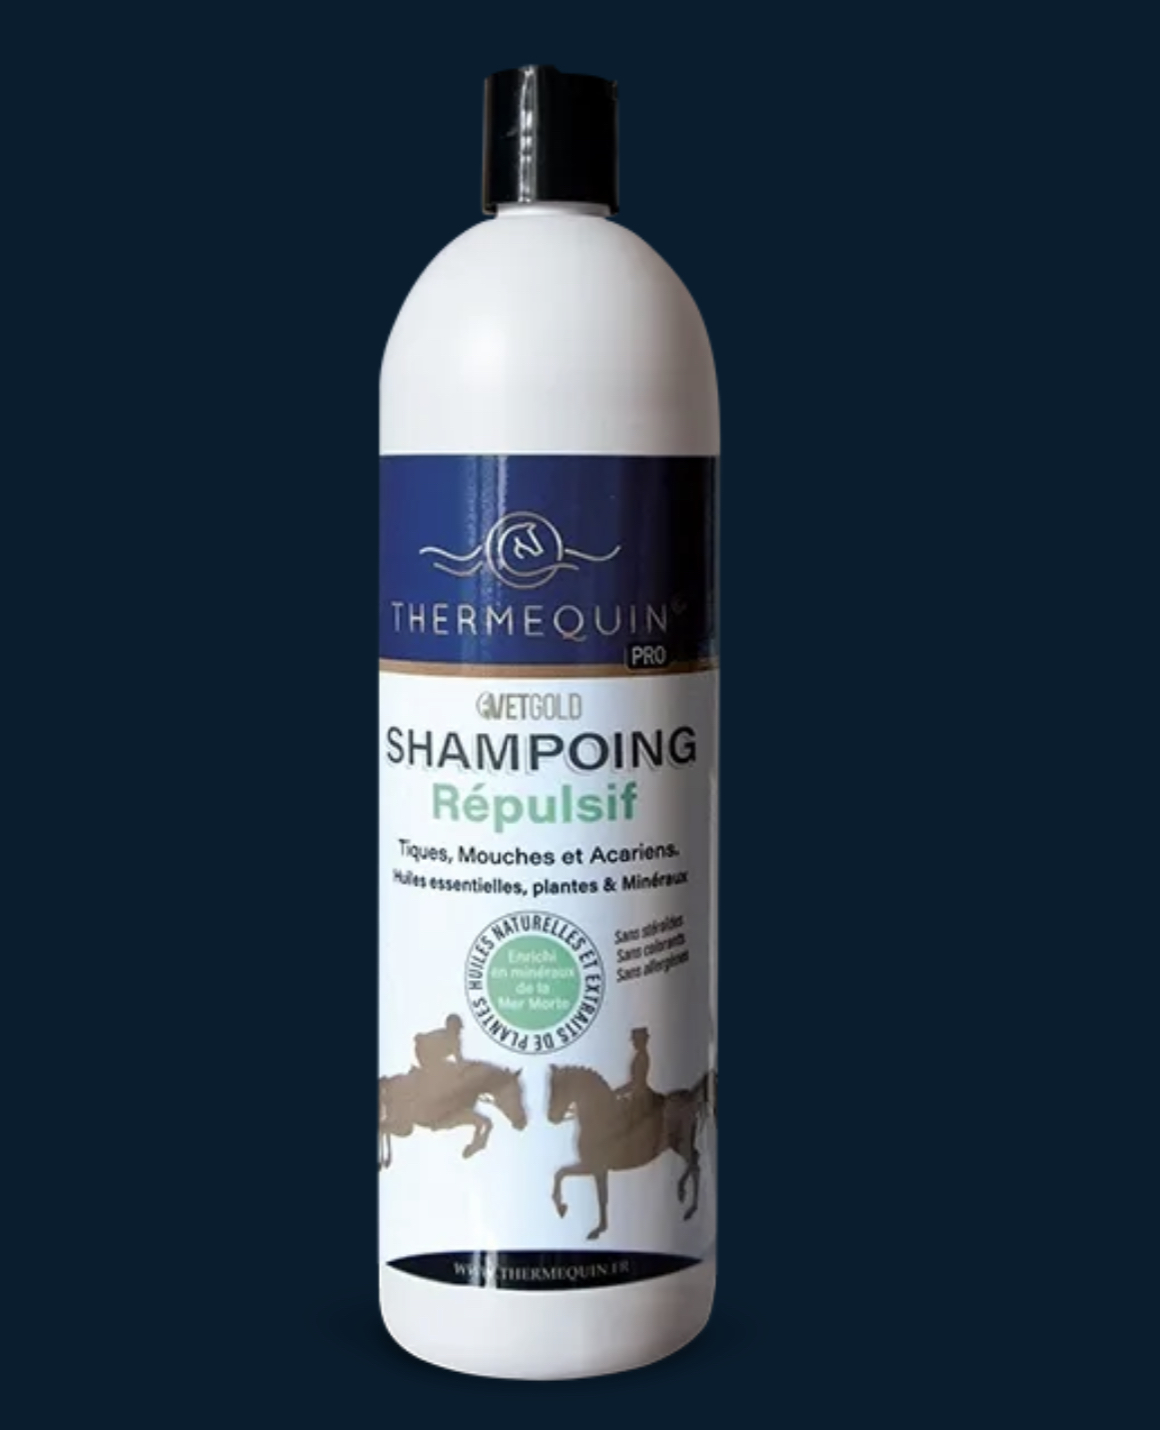 Shampoing répulsif 1 litre Thermequin